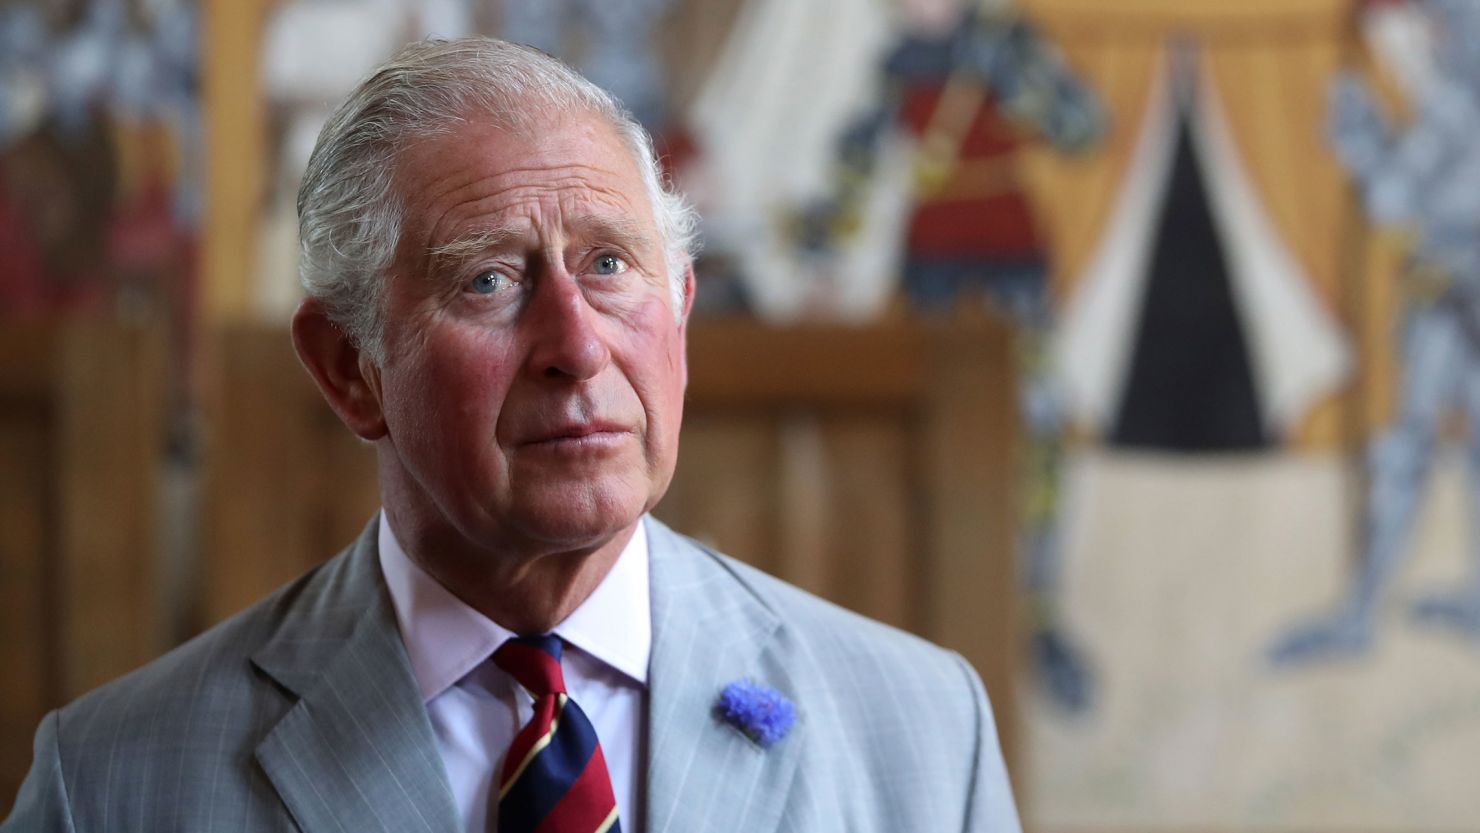 Prince Charles' list of songs will be made available on Spotify.